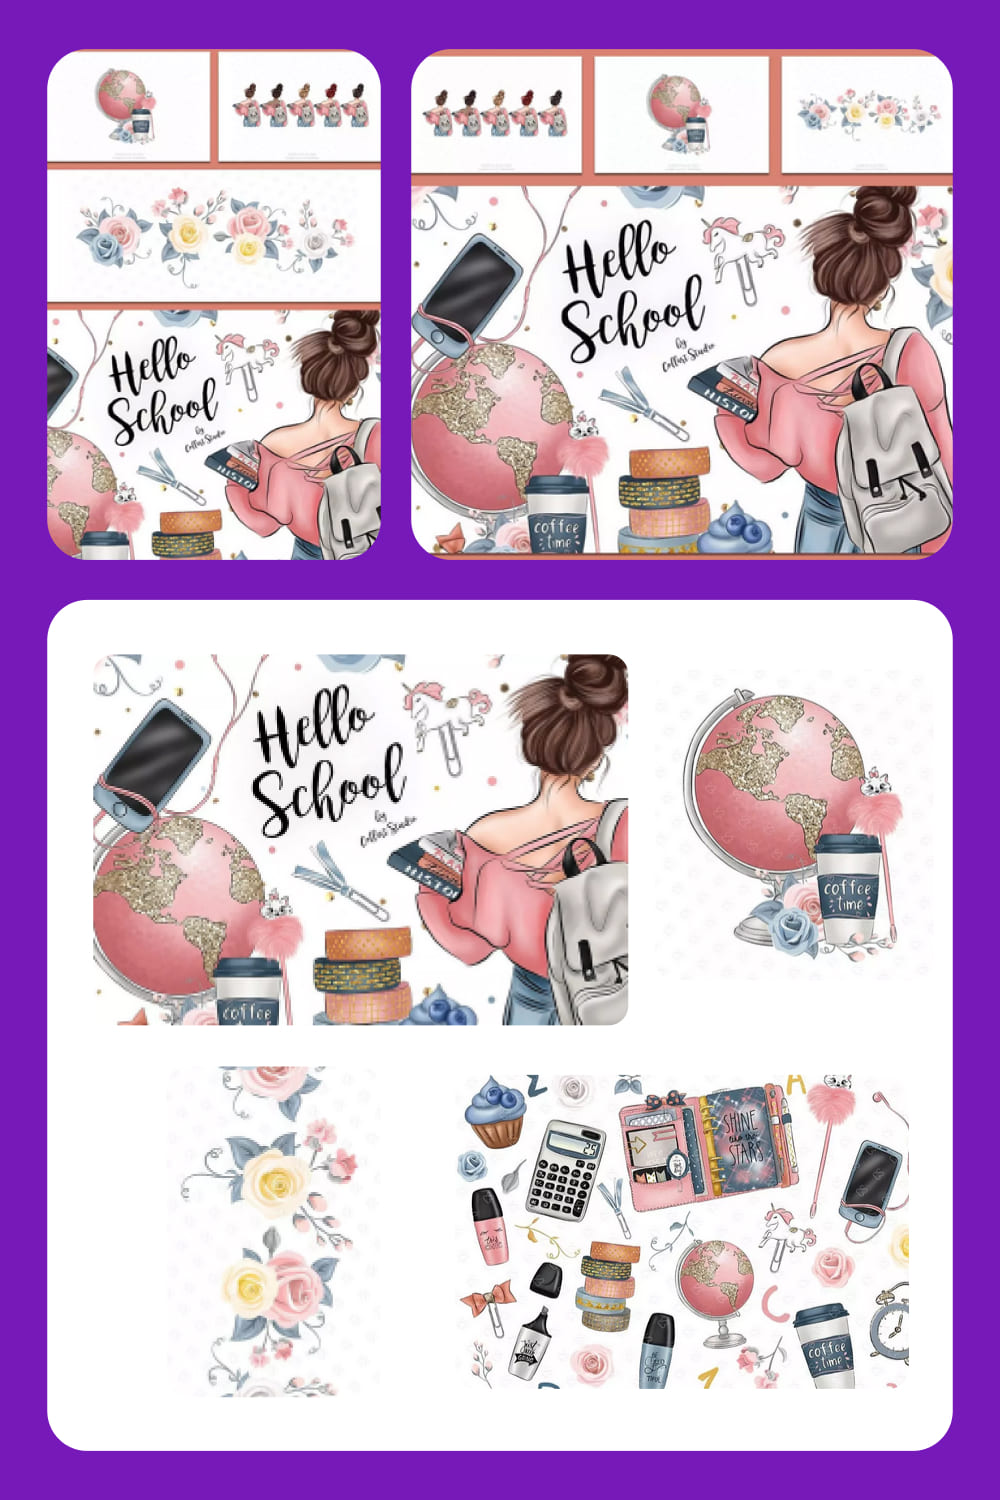 Collage of images of a female student, a globe, a calculator and school supplies.